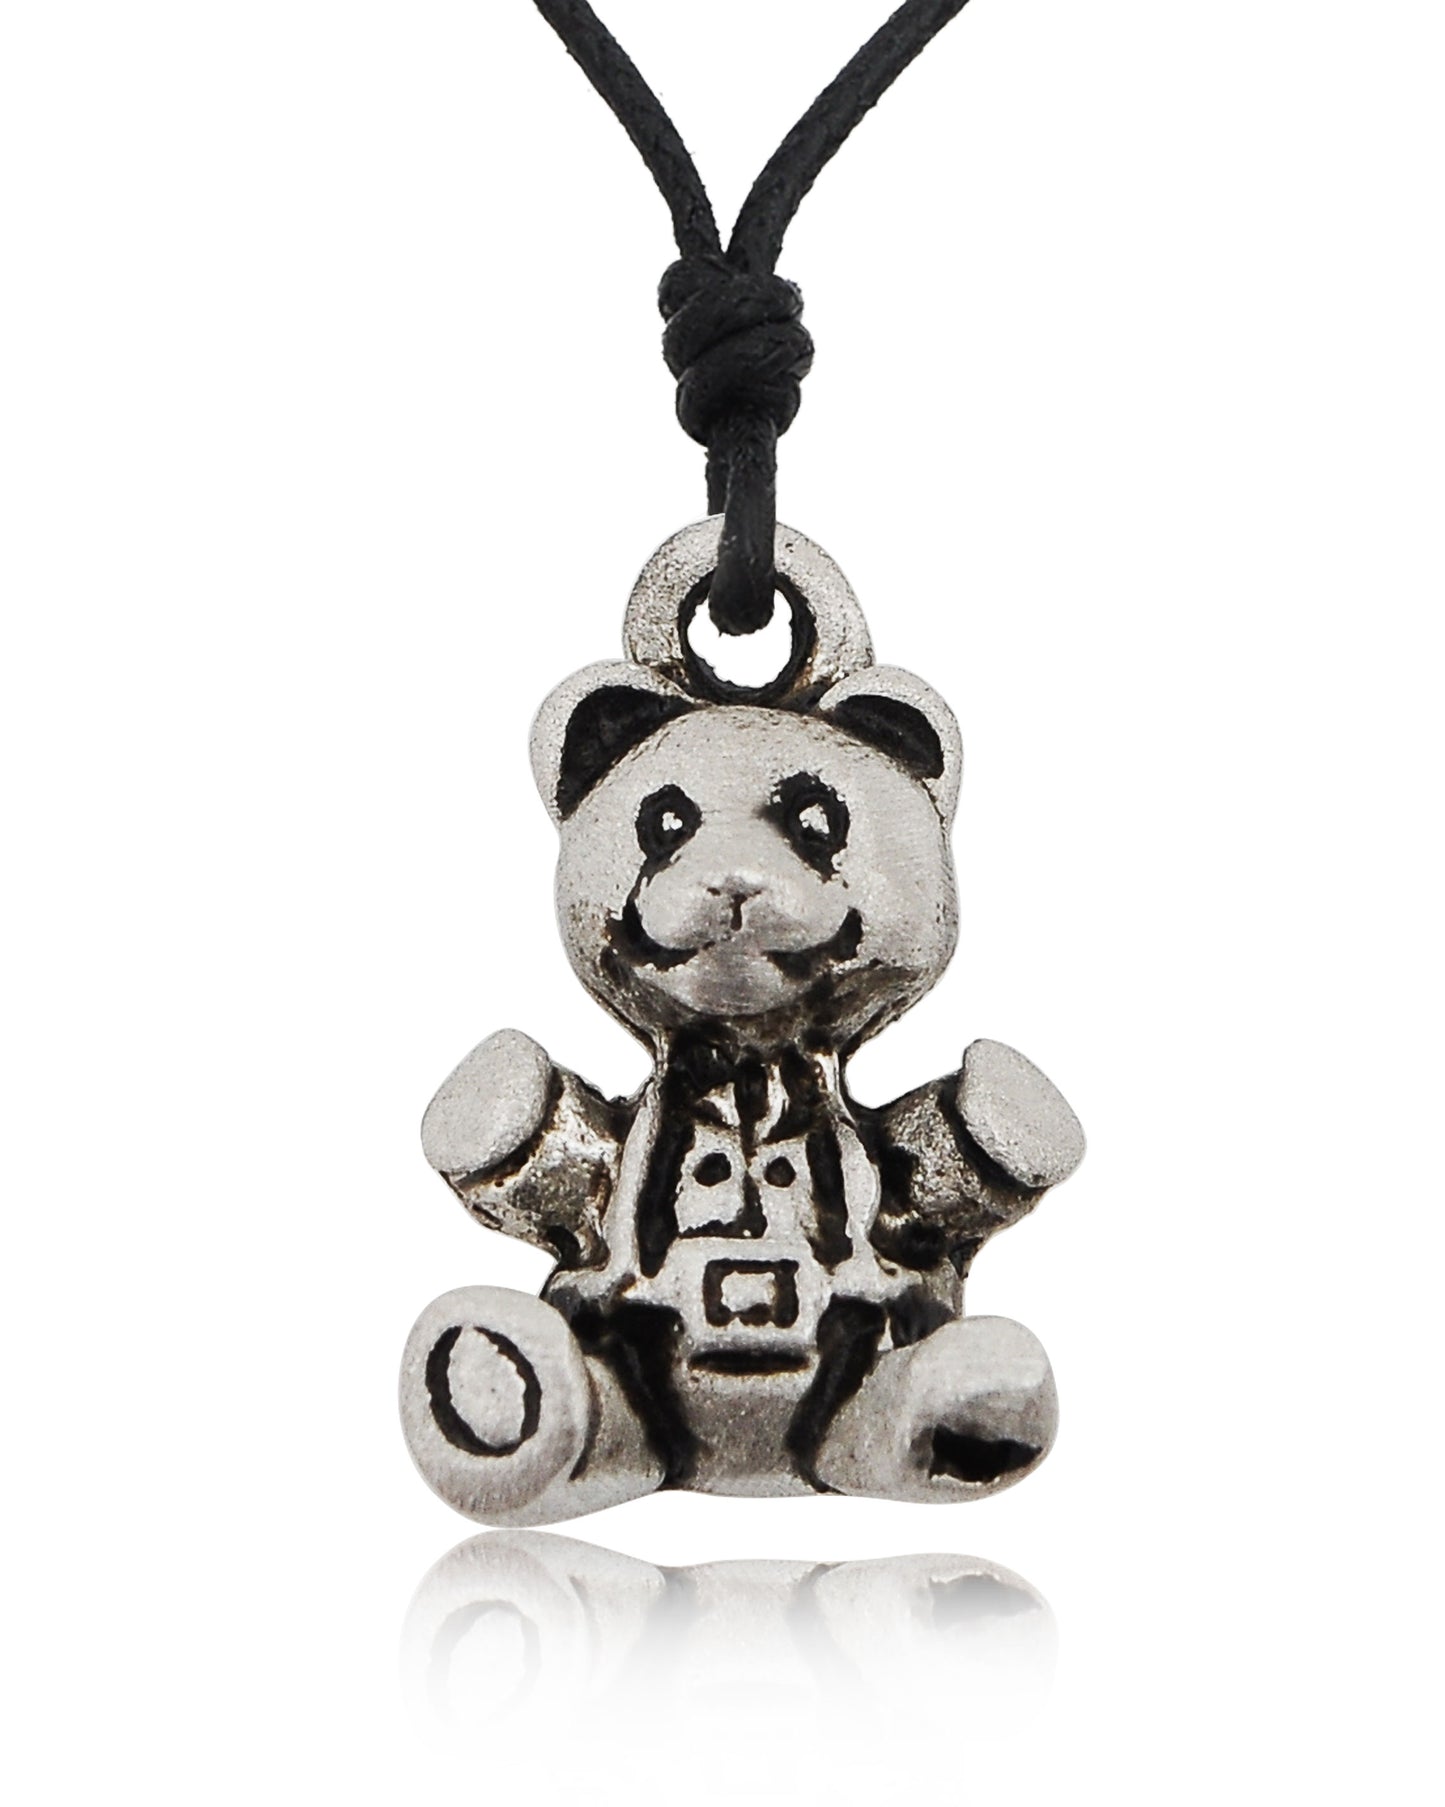 New Teddy Bear Sterling-silver Pewter Charm Necklace Pendant Jewelry